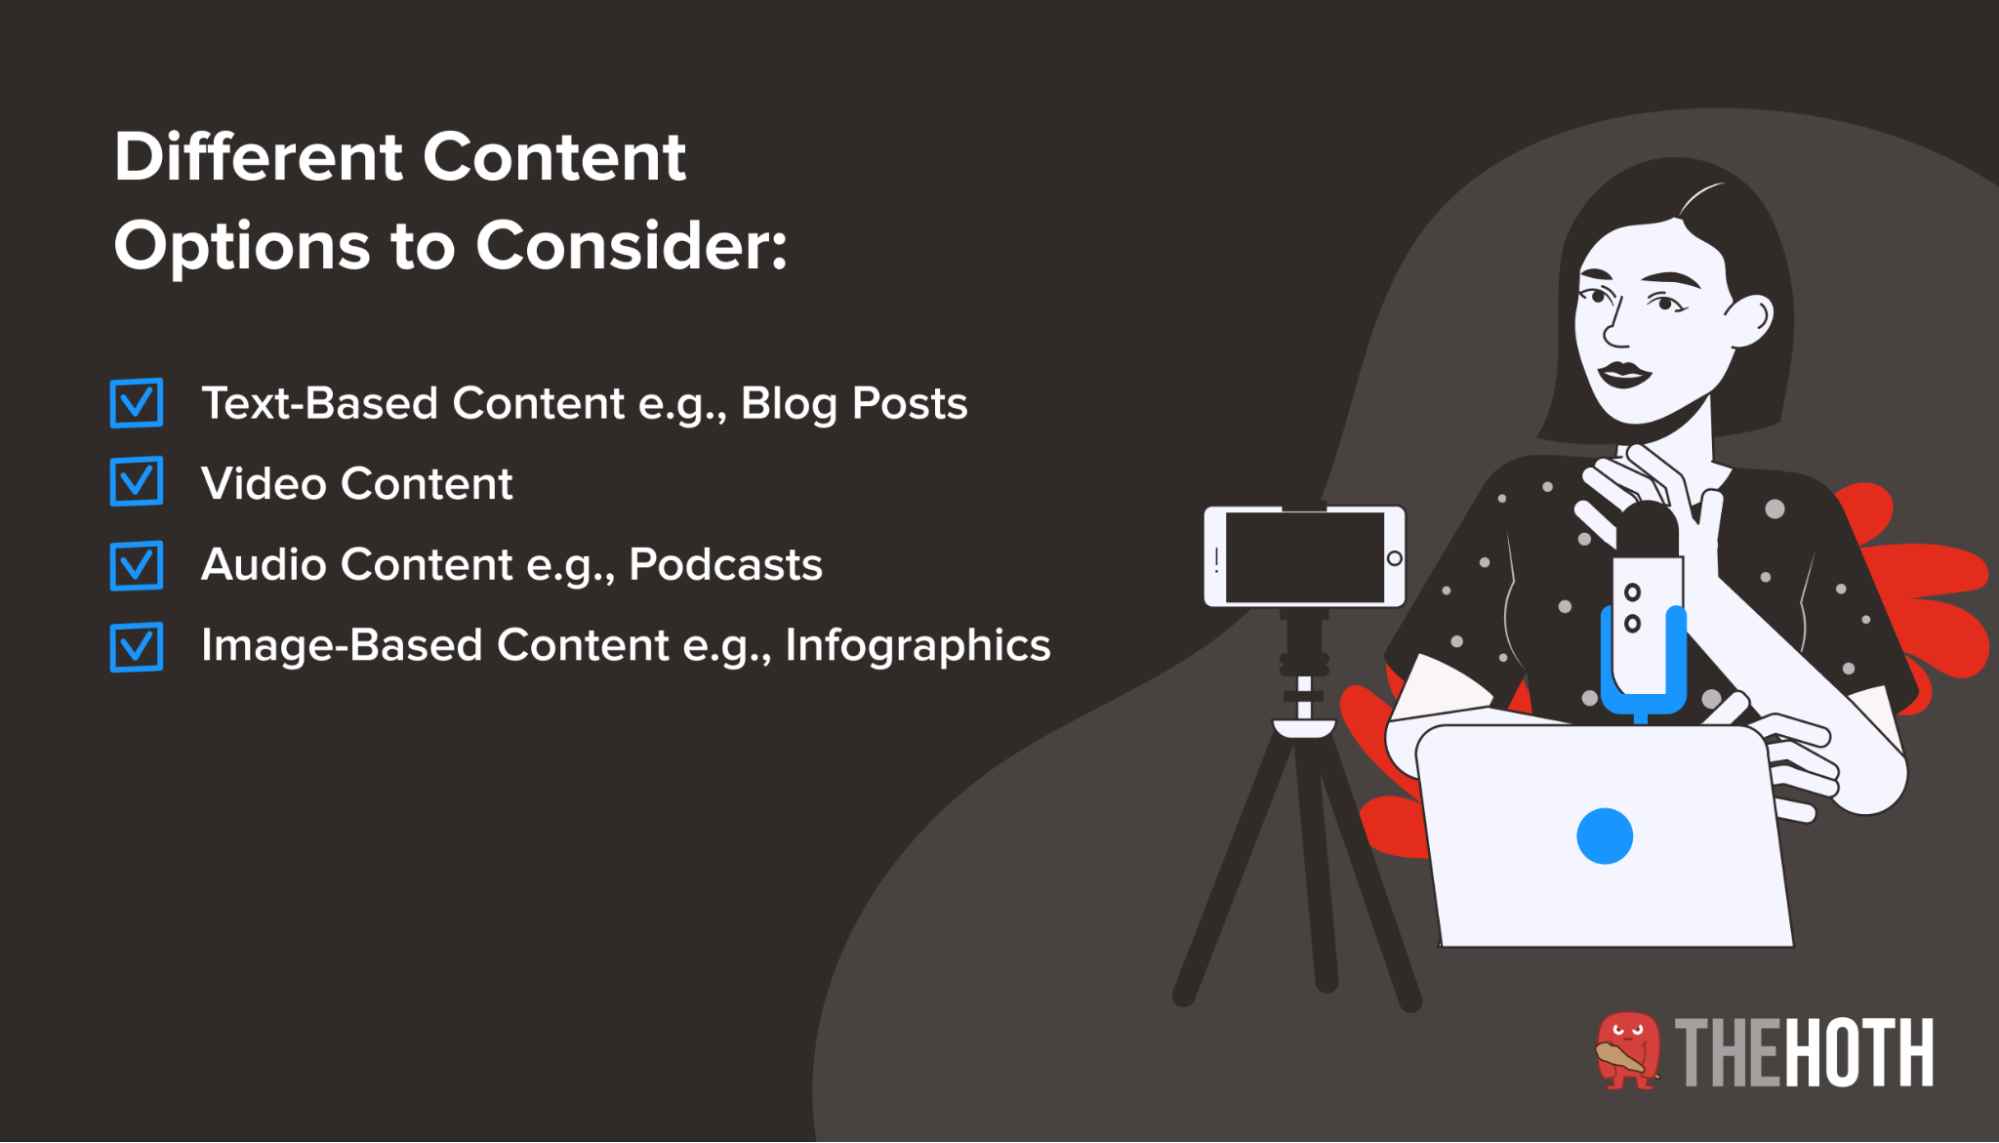 A checklist considering different content options